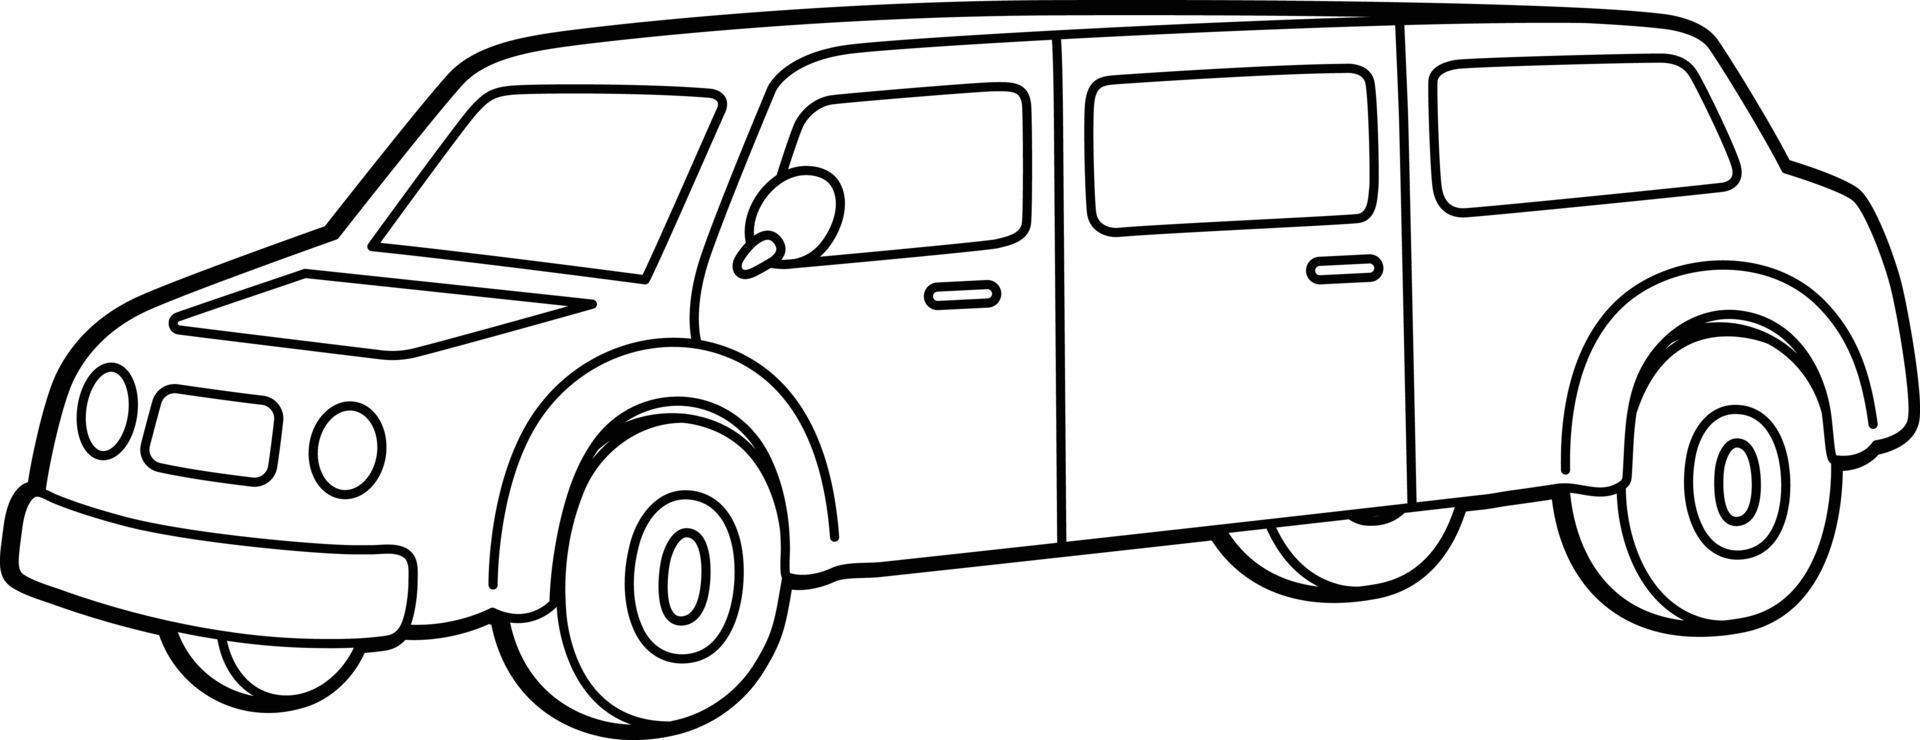 Limo Coloring Page Isolated for Kids vector